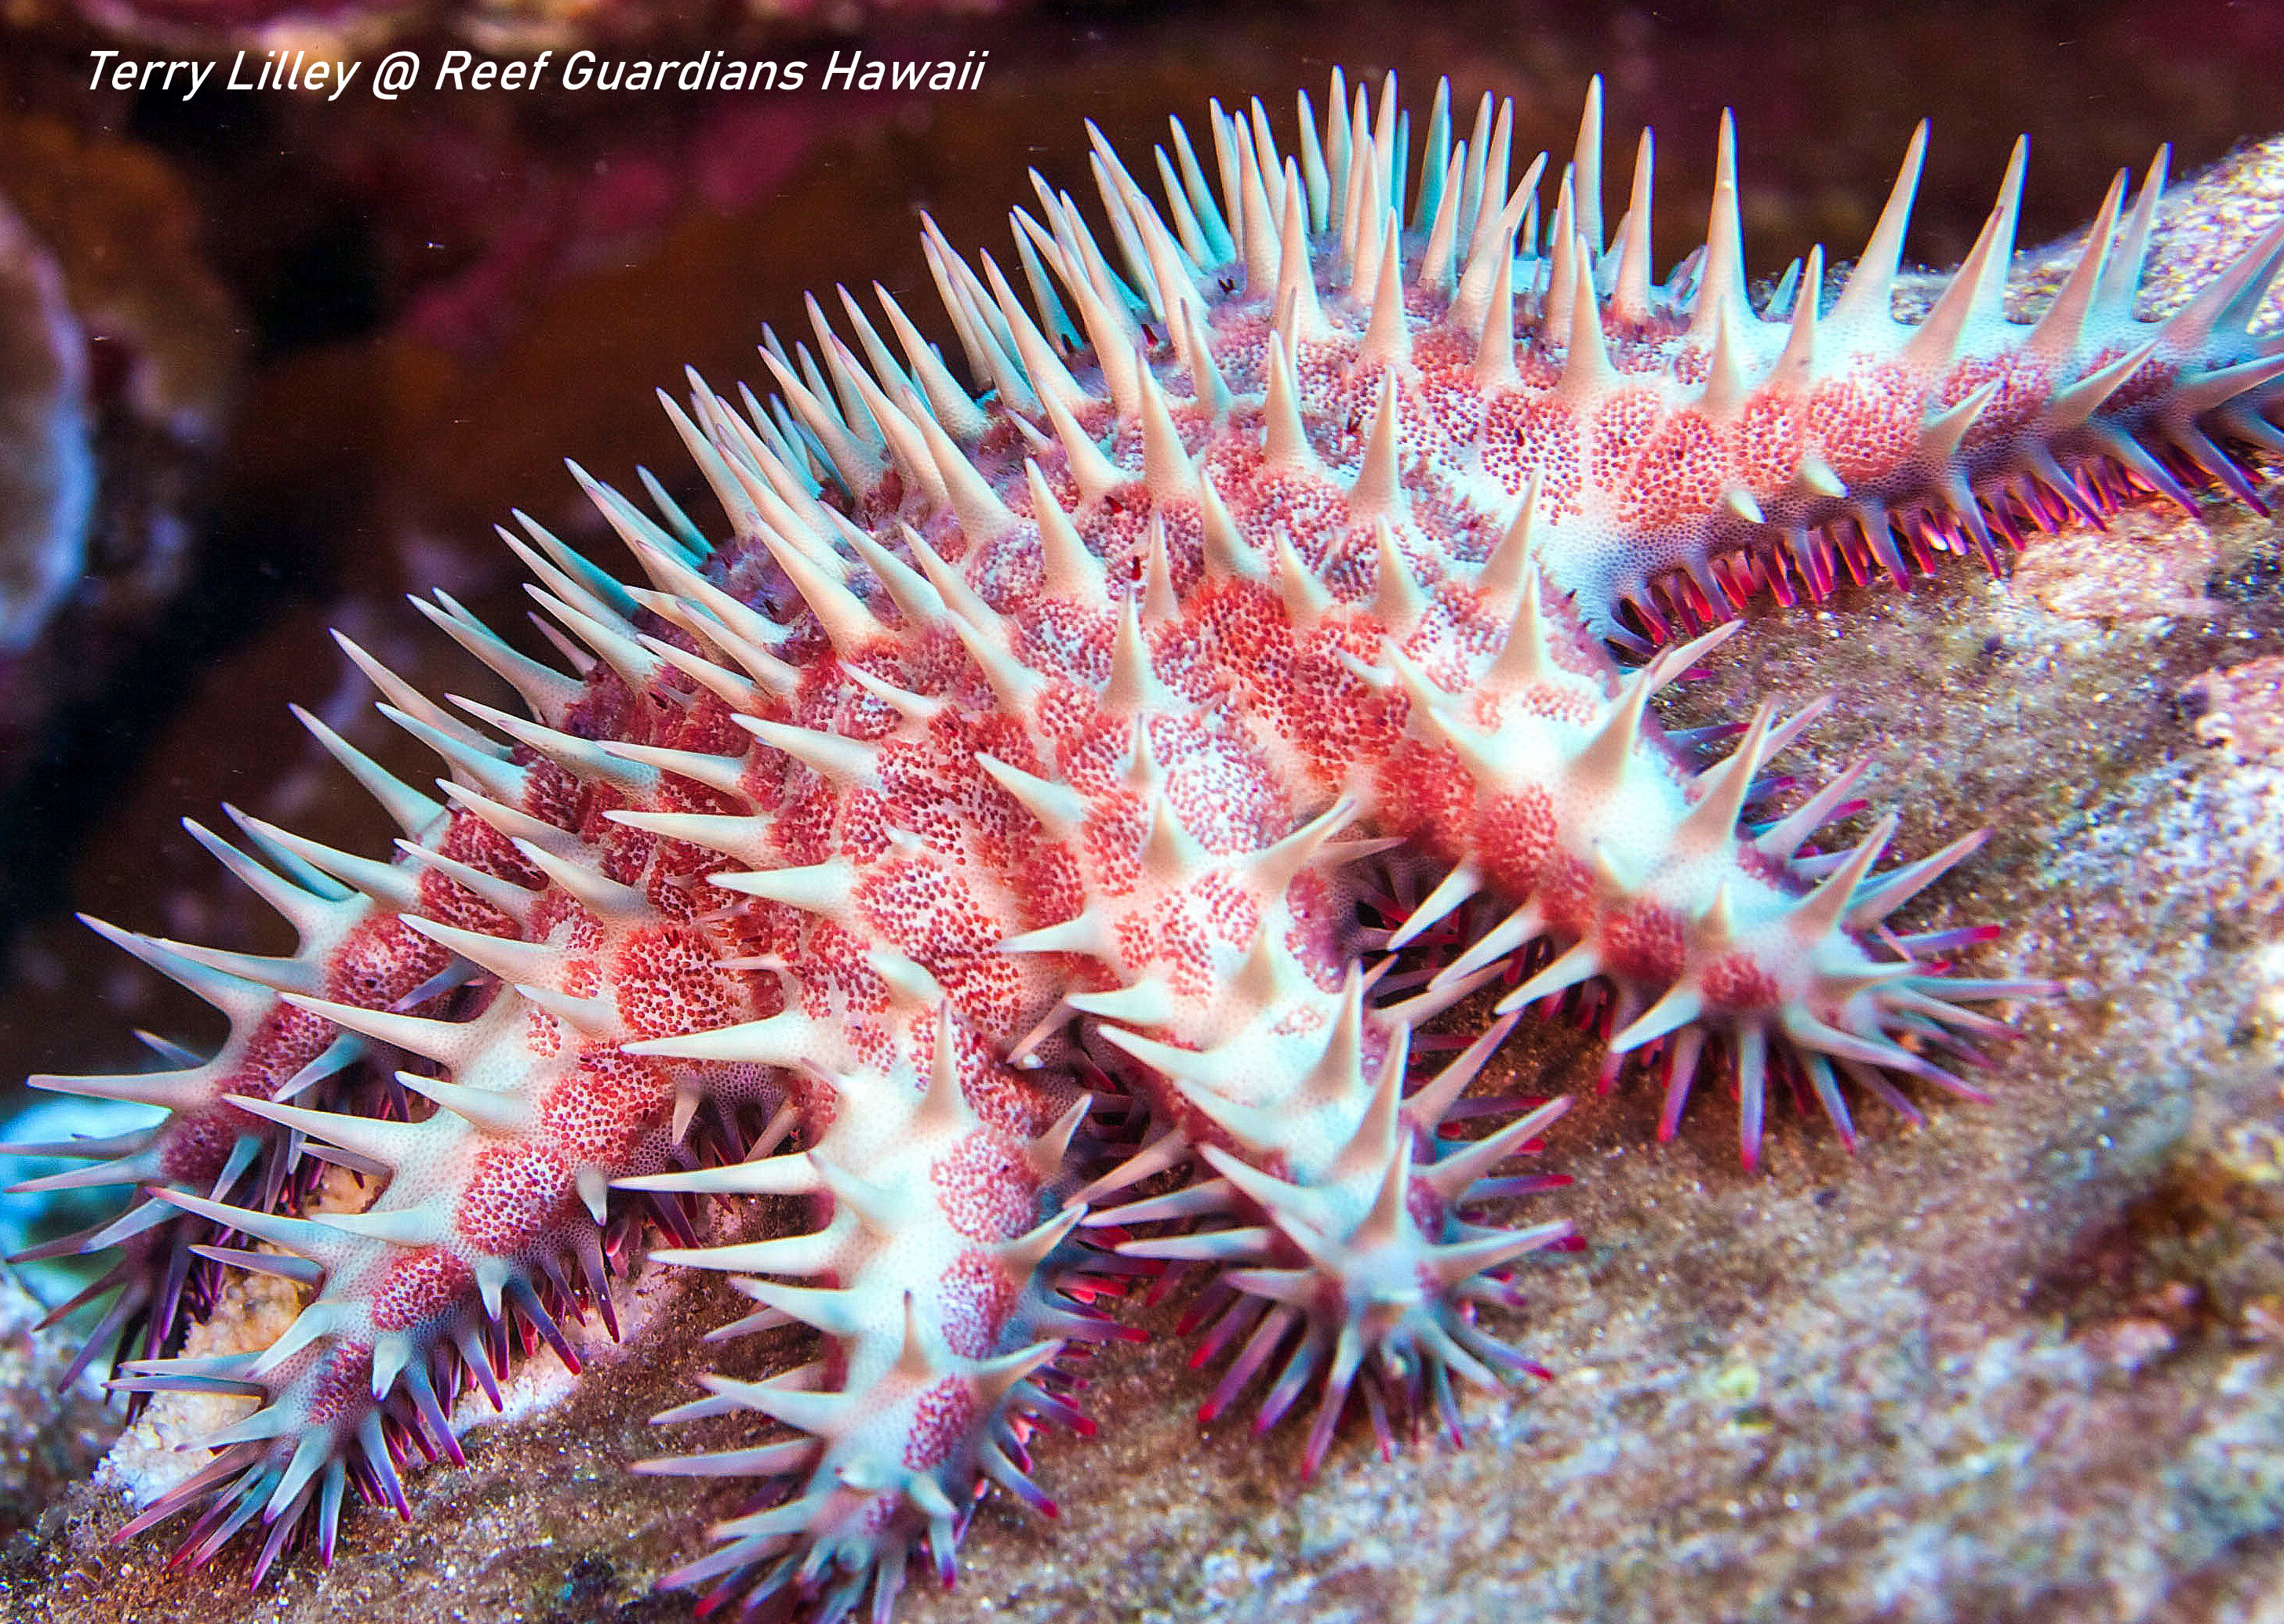 Crown-Of-Thorns Star